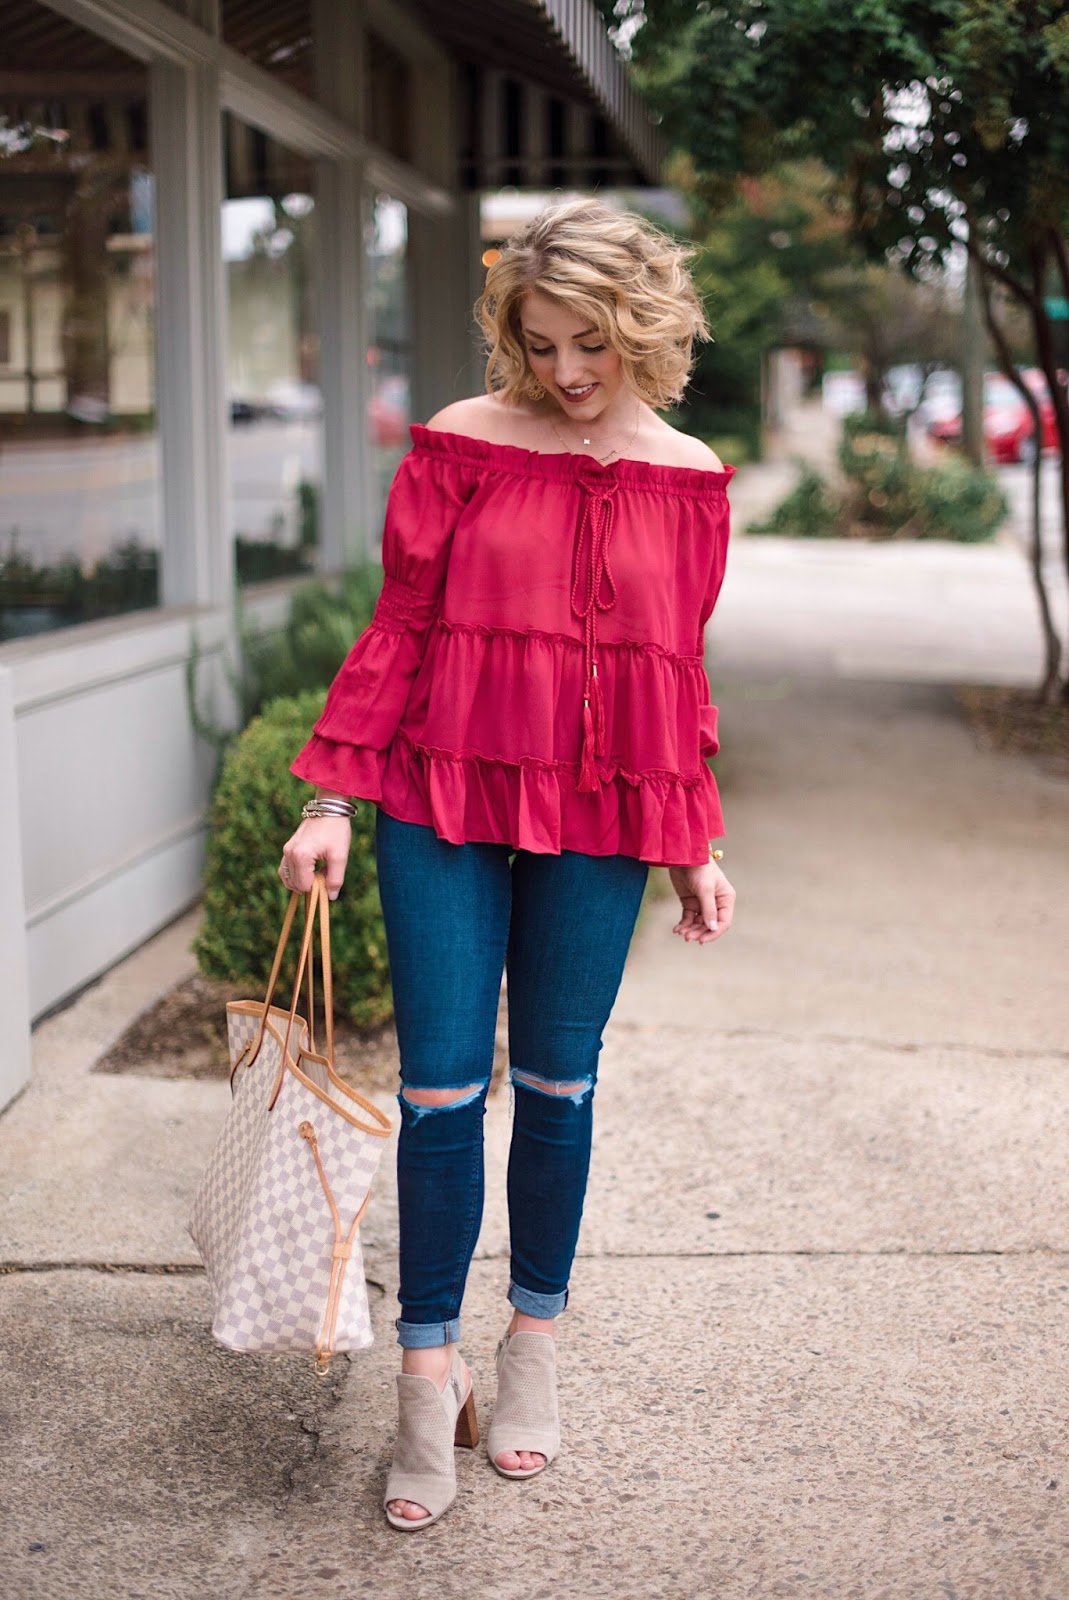 Transitioning to Fall Look - Something Delightful Blog